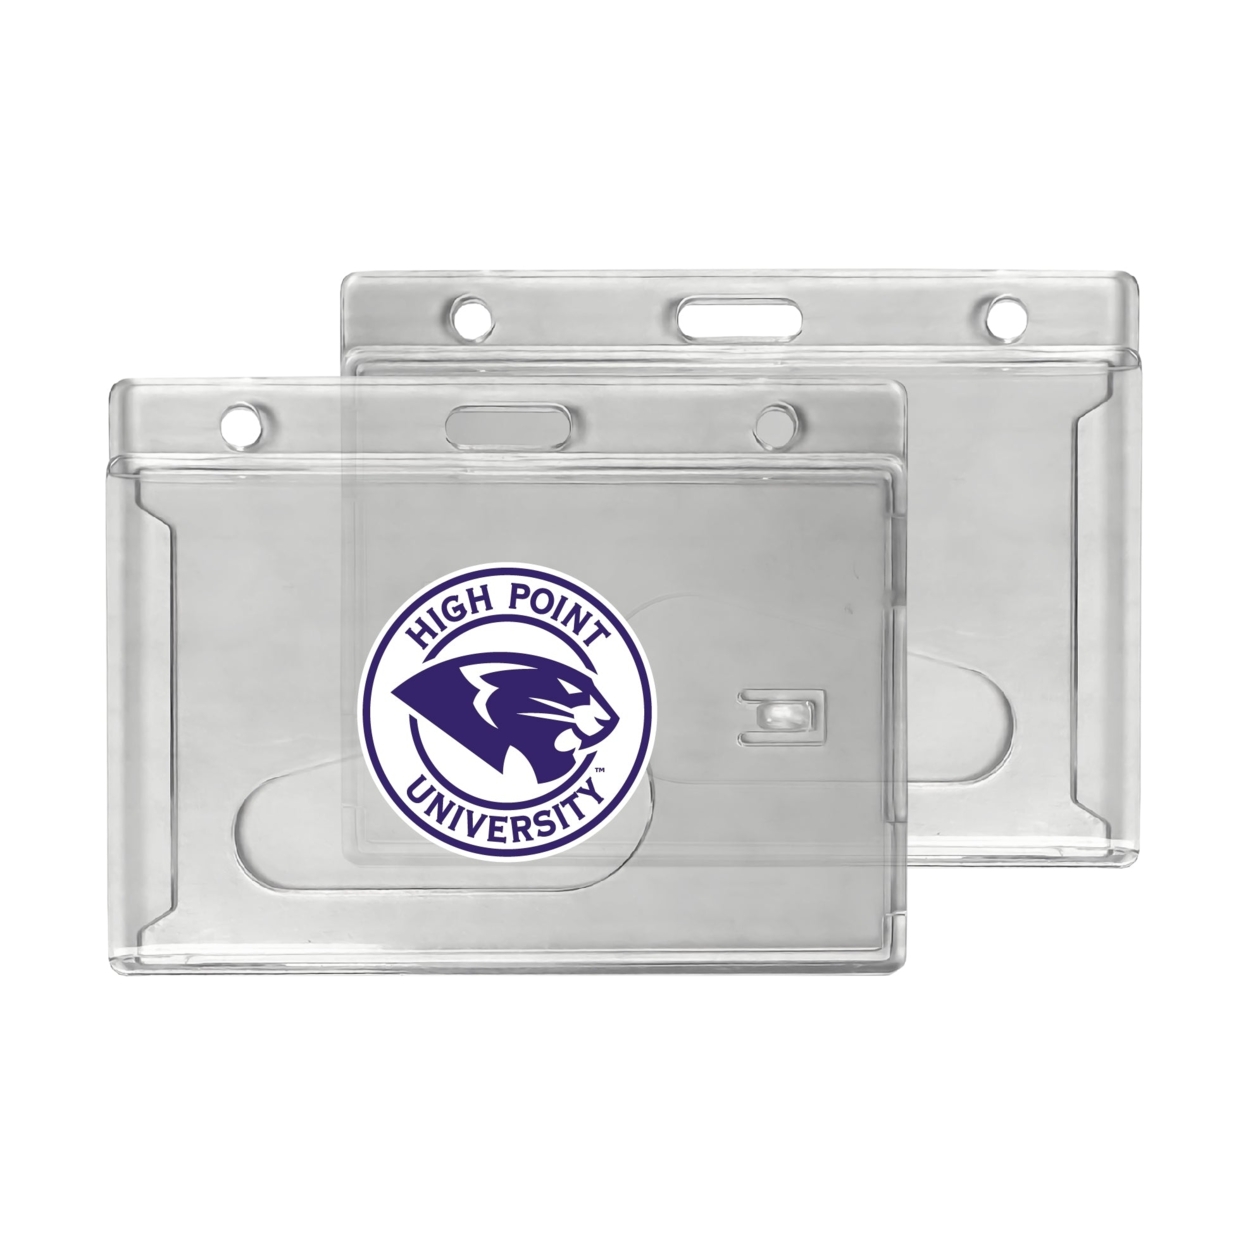 High Point University Clear View ID Holder